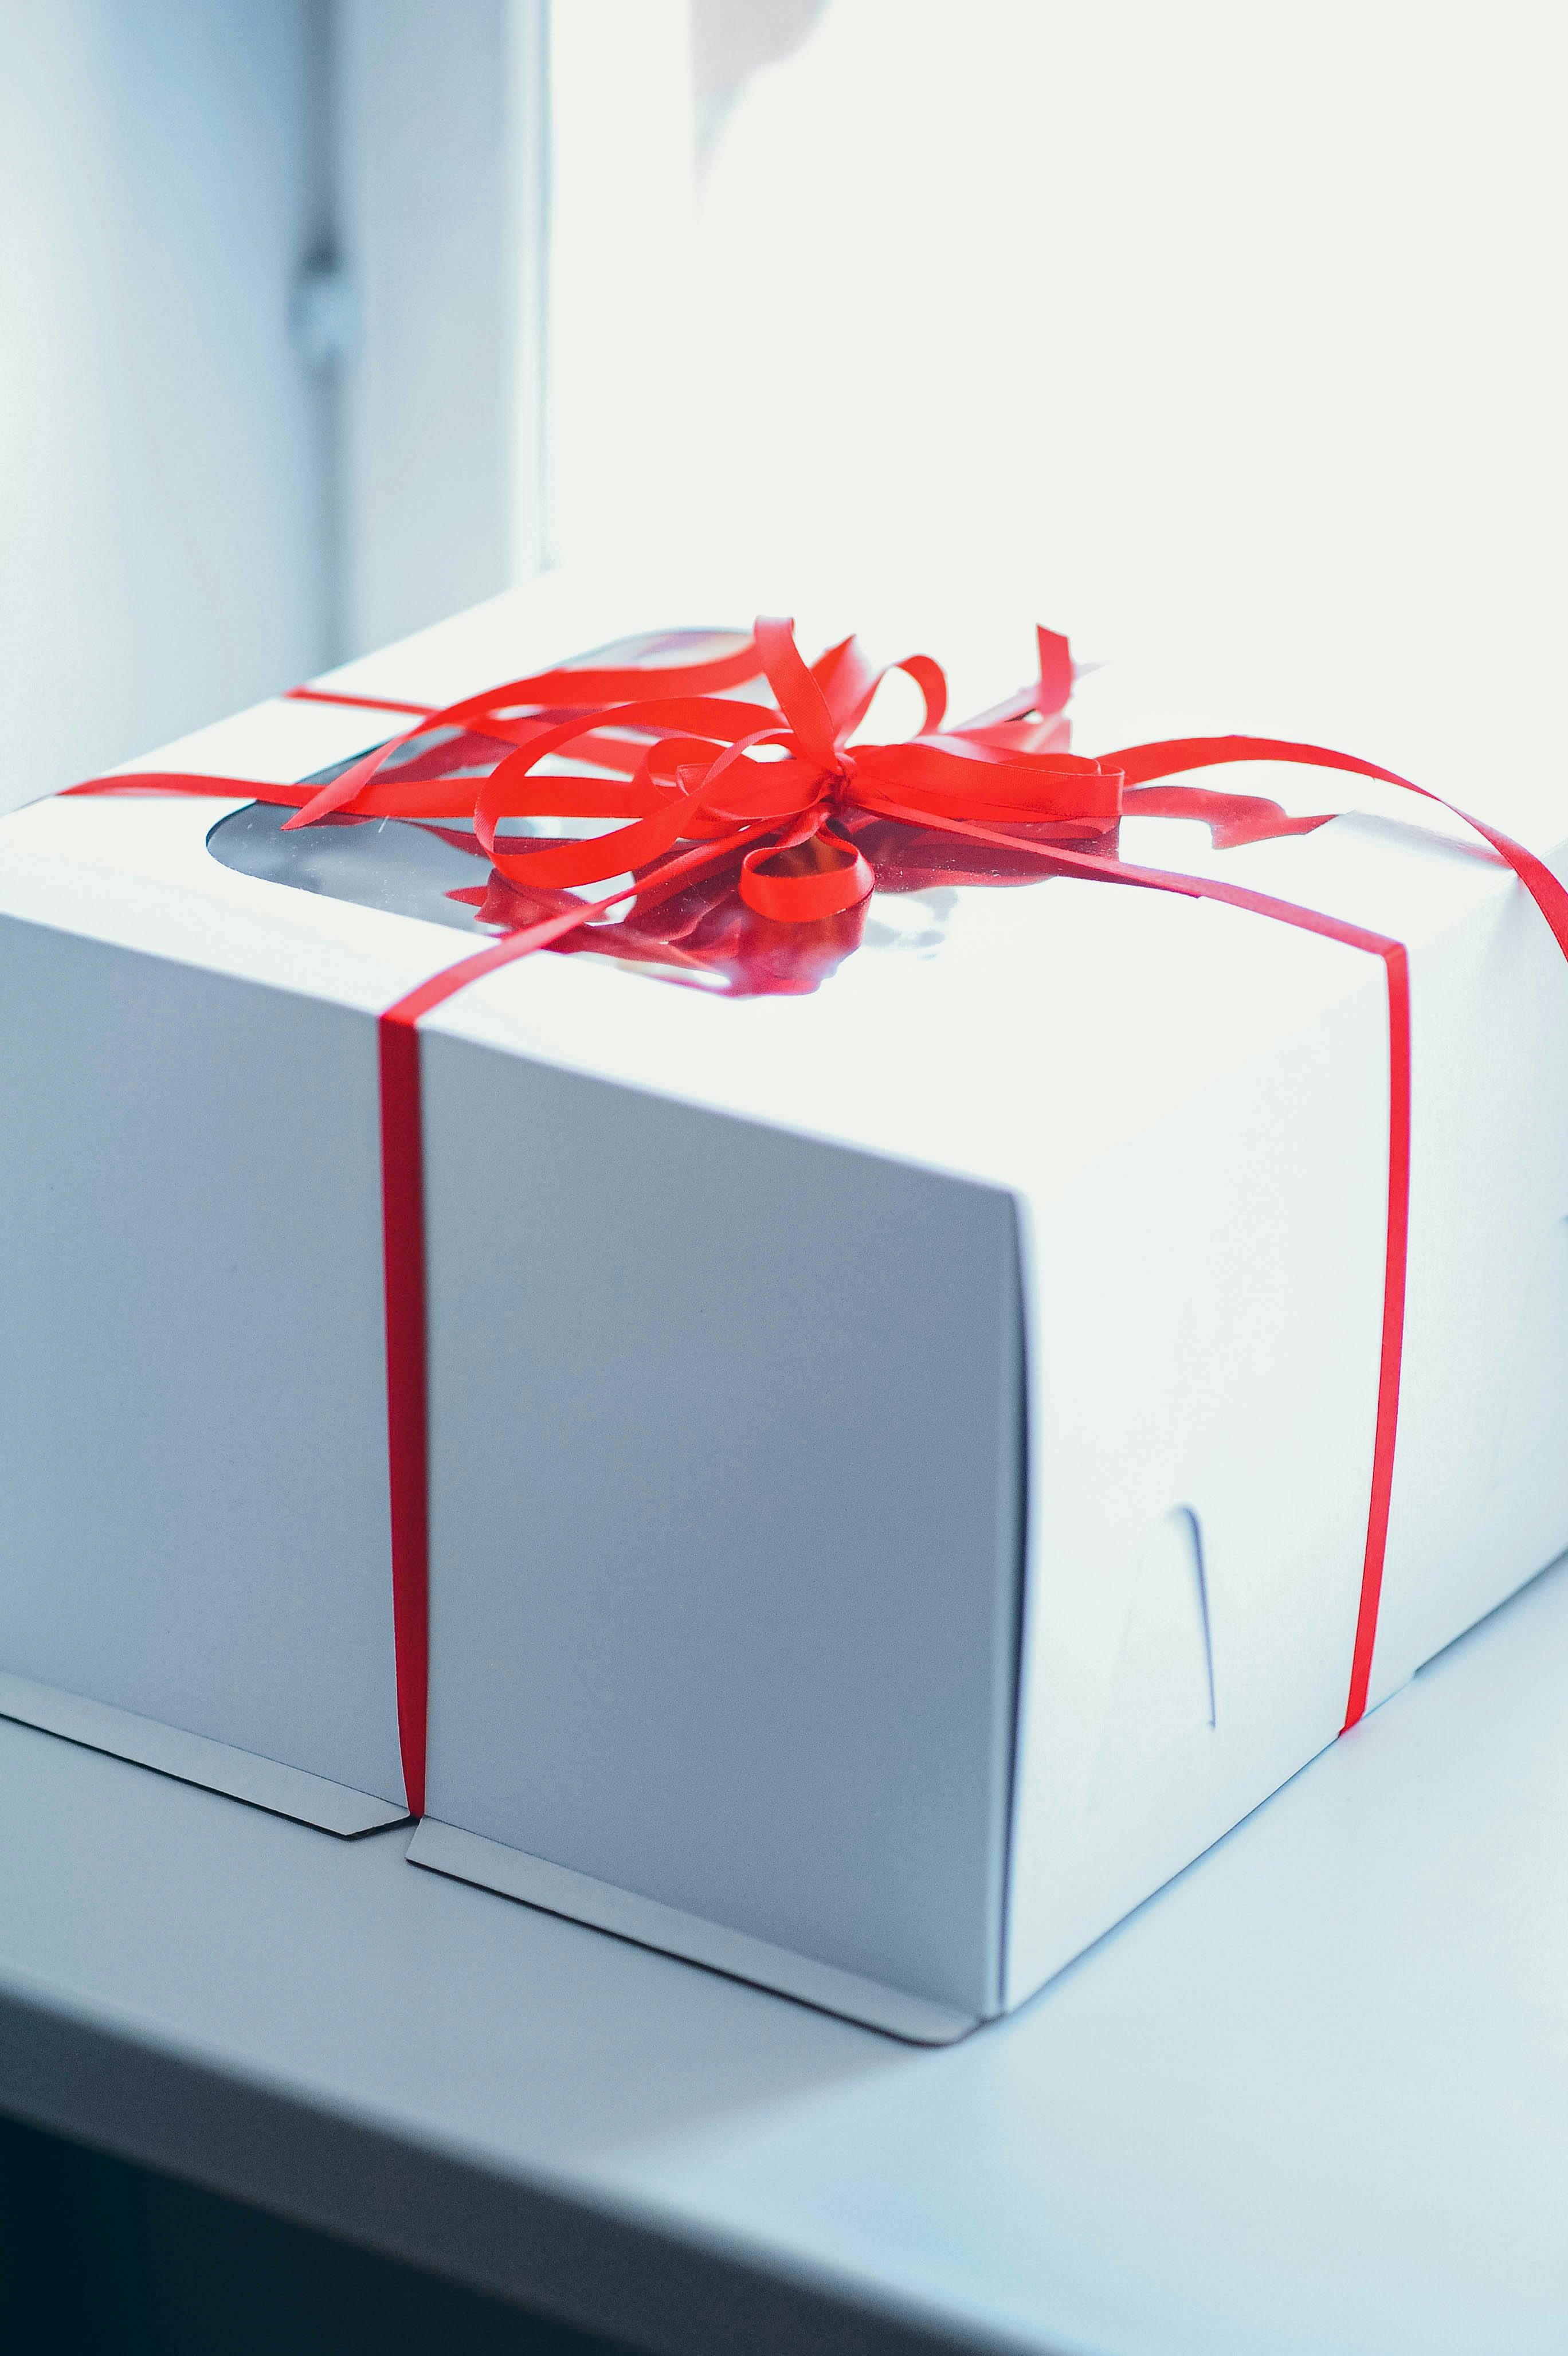 Violet Gift Boxes Stock Photos and Images - 123RF